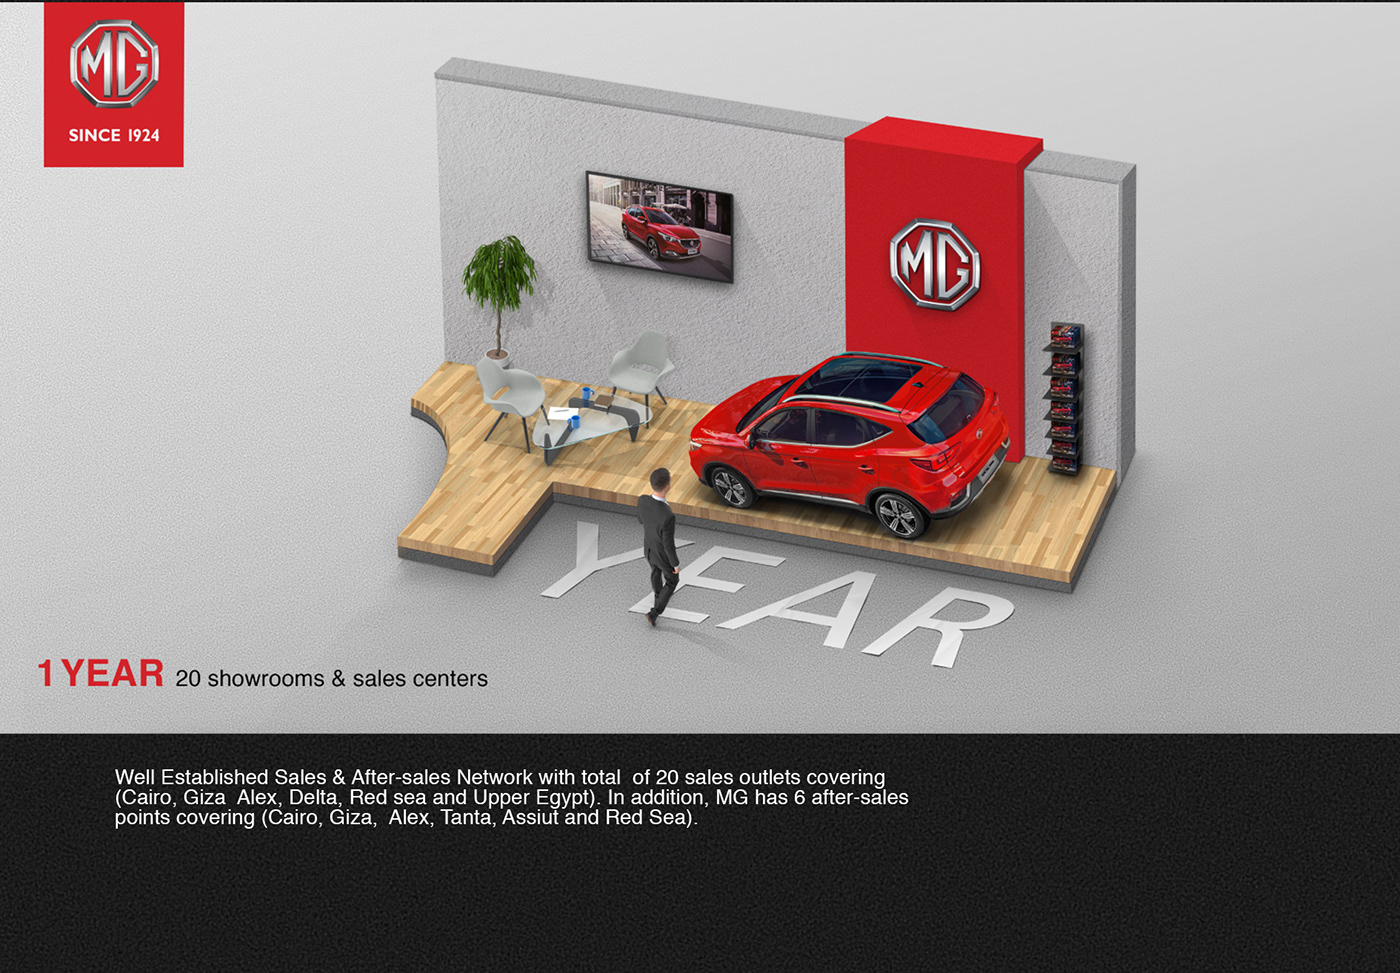 #ads #Campaign #car #Creative #drive #installment #outdoor #services #showroom  MG